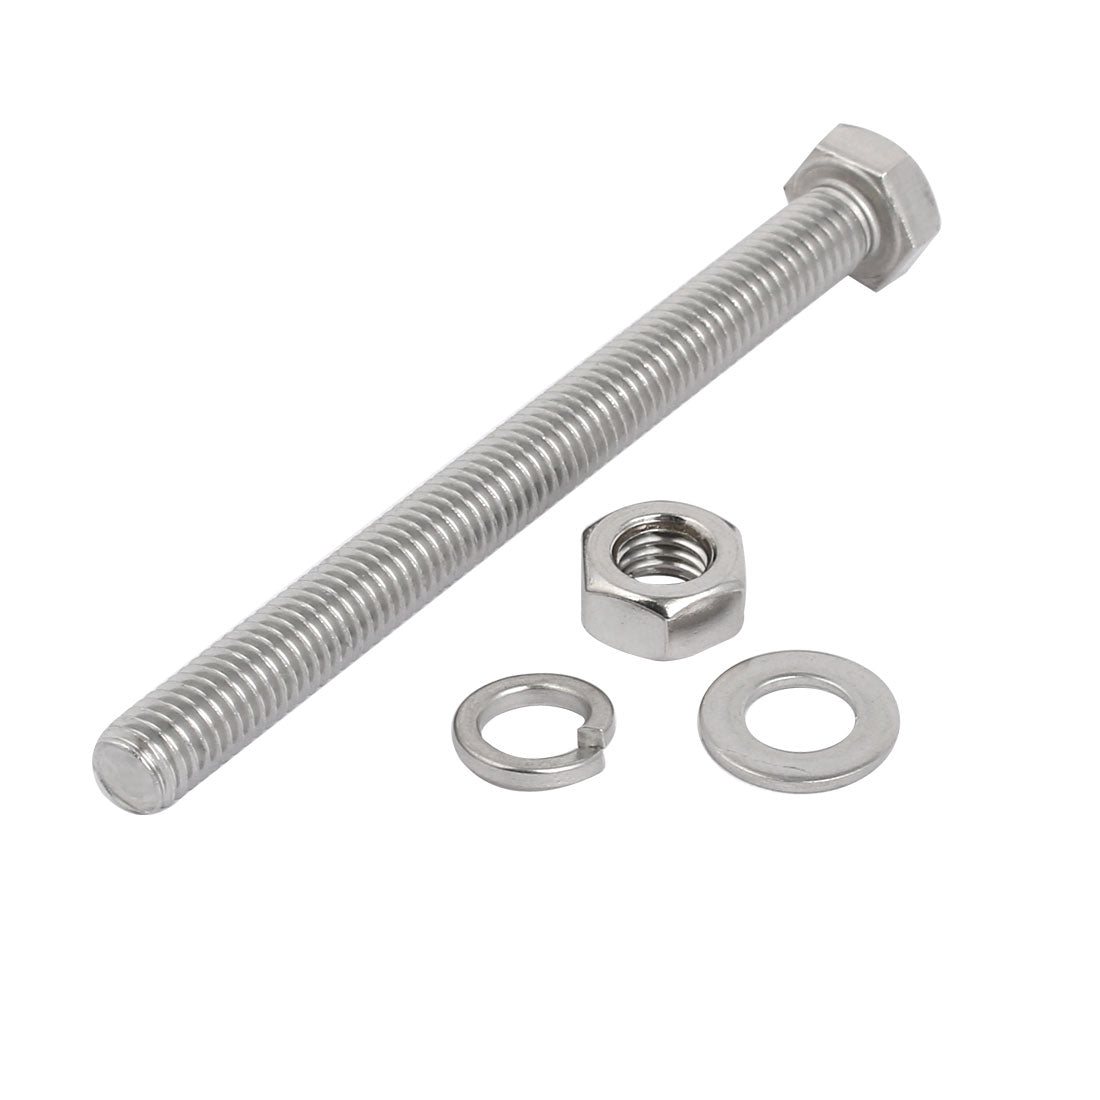 uxcell Uxcell 5 Set M8x100mm 304 Stainless Steel Hex Bolts w Nuts and Washers Assortment Kit